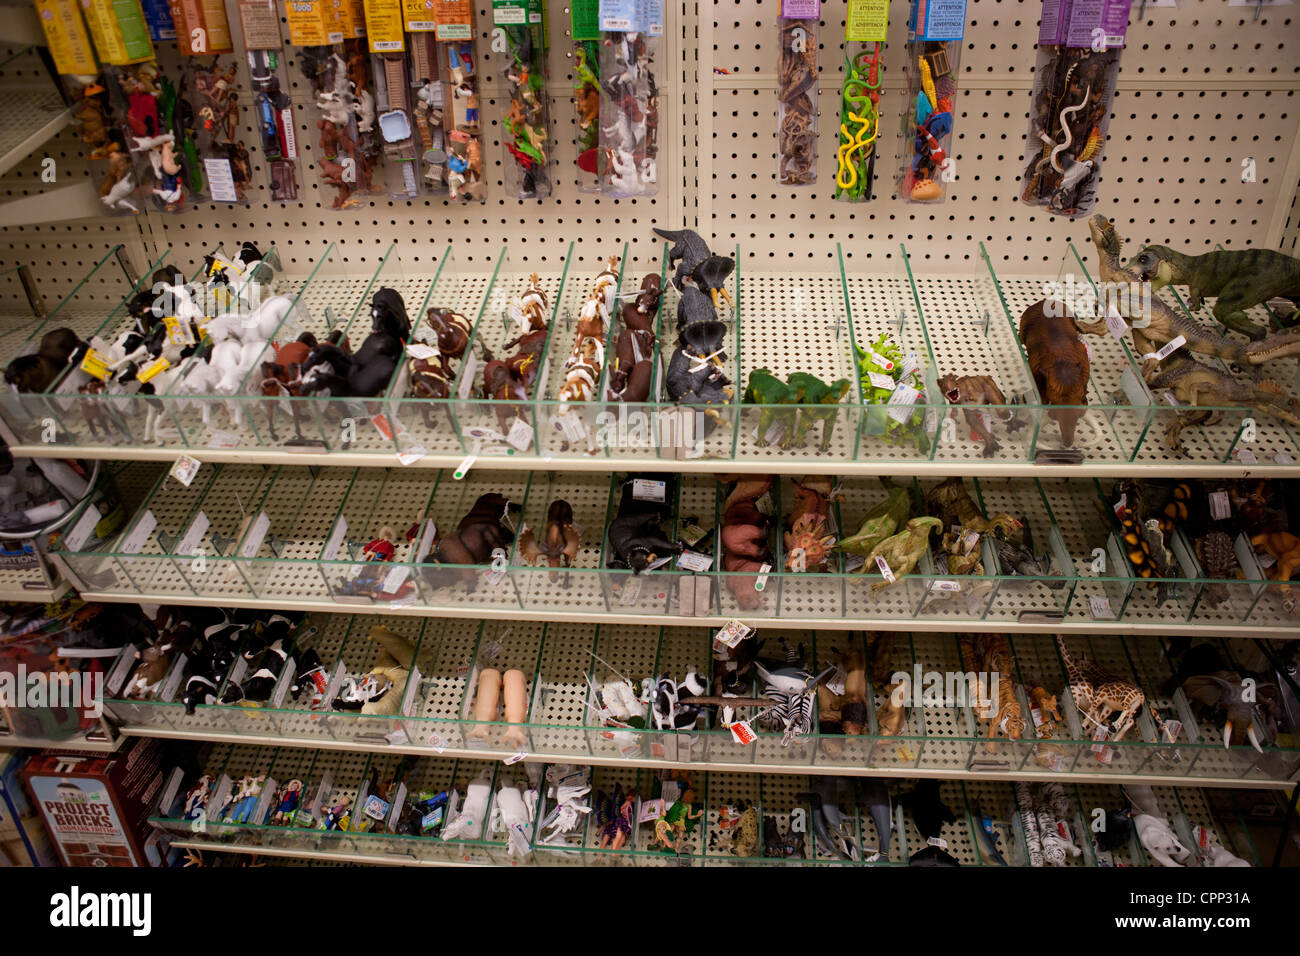 Shelves of plastic wild animals, reptile, dinosaur figures in a store. Stock Photo